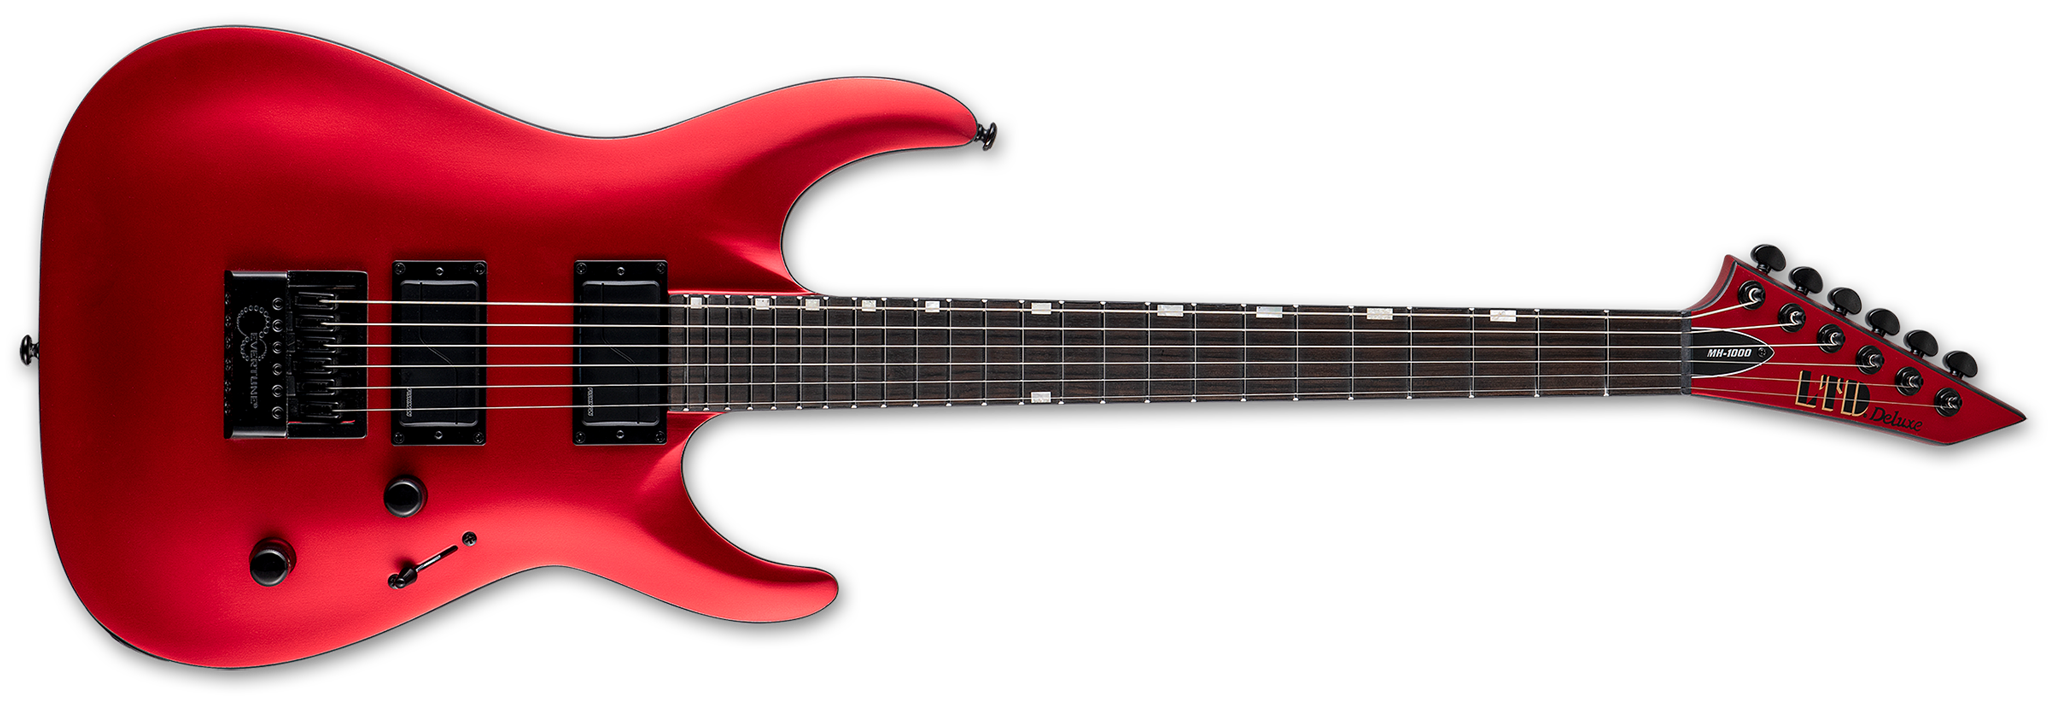 LTD MH-1000 Evertune  Candy Apple Red Satin 6-String Electric Guitar